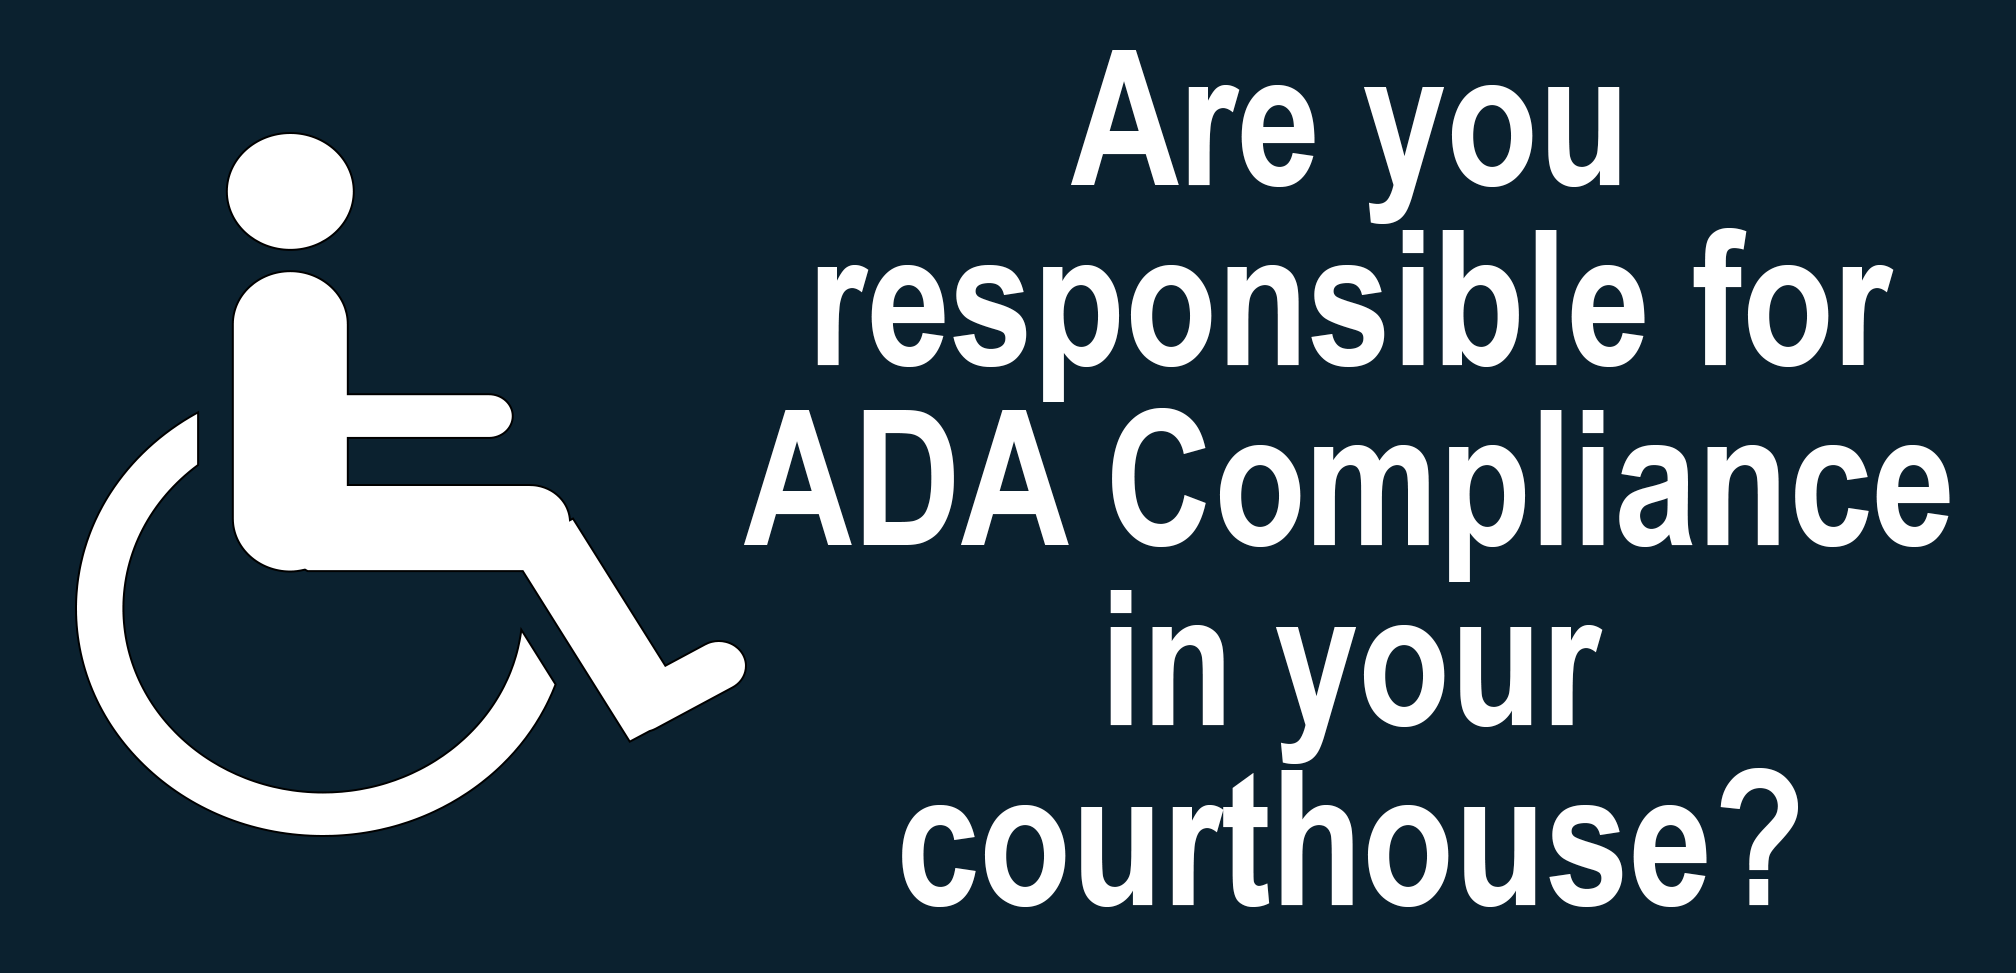 Are you responsible for ADA compliance in your courthouse? 